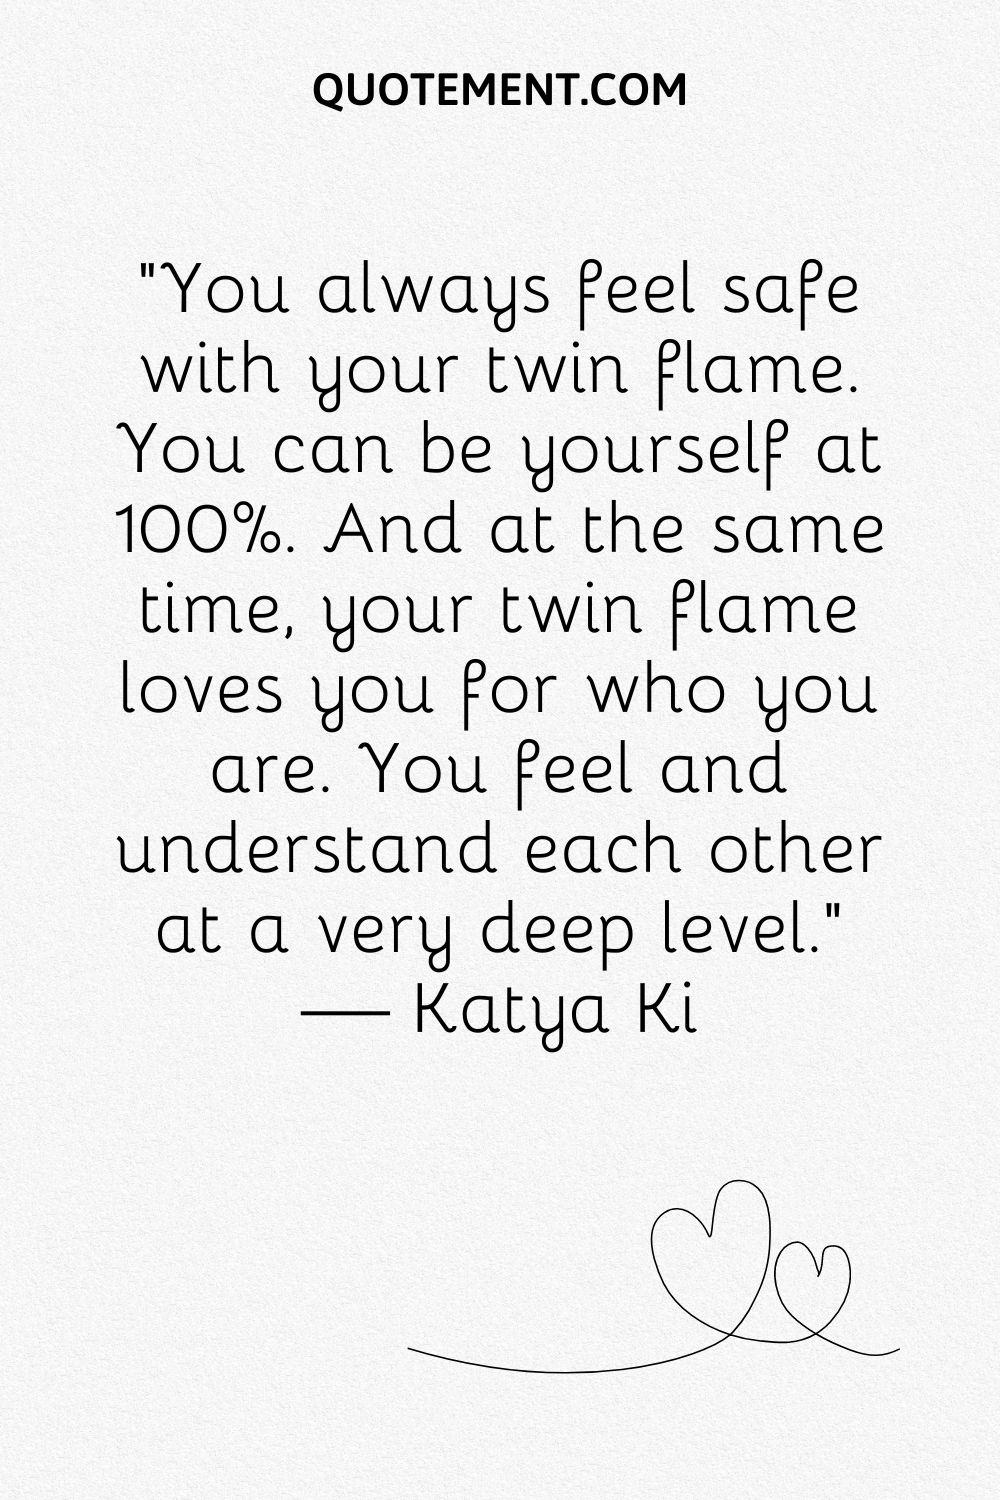 You always feel safe with your twin flame